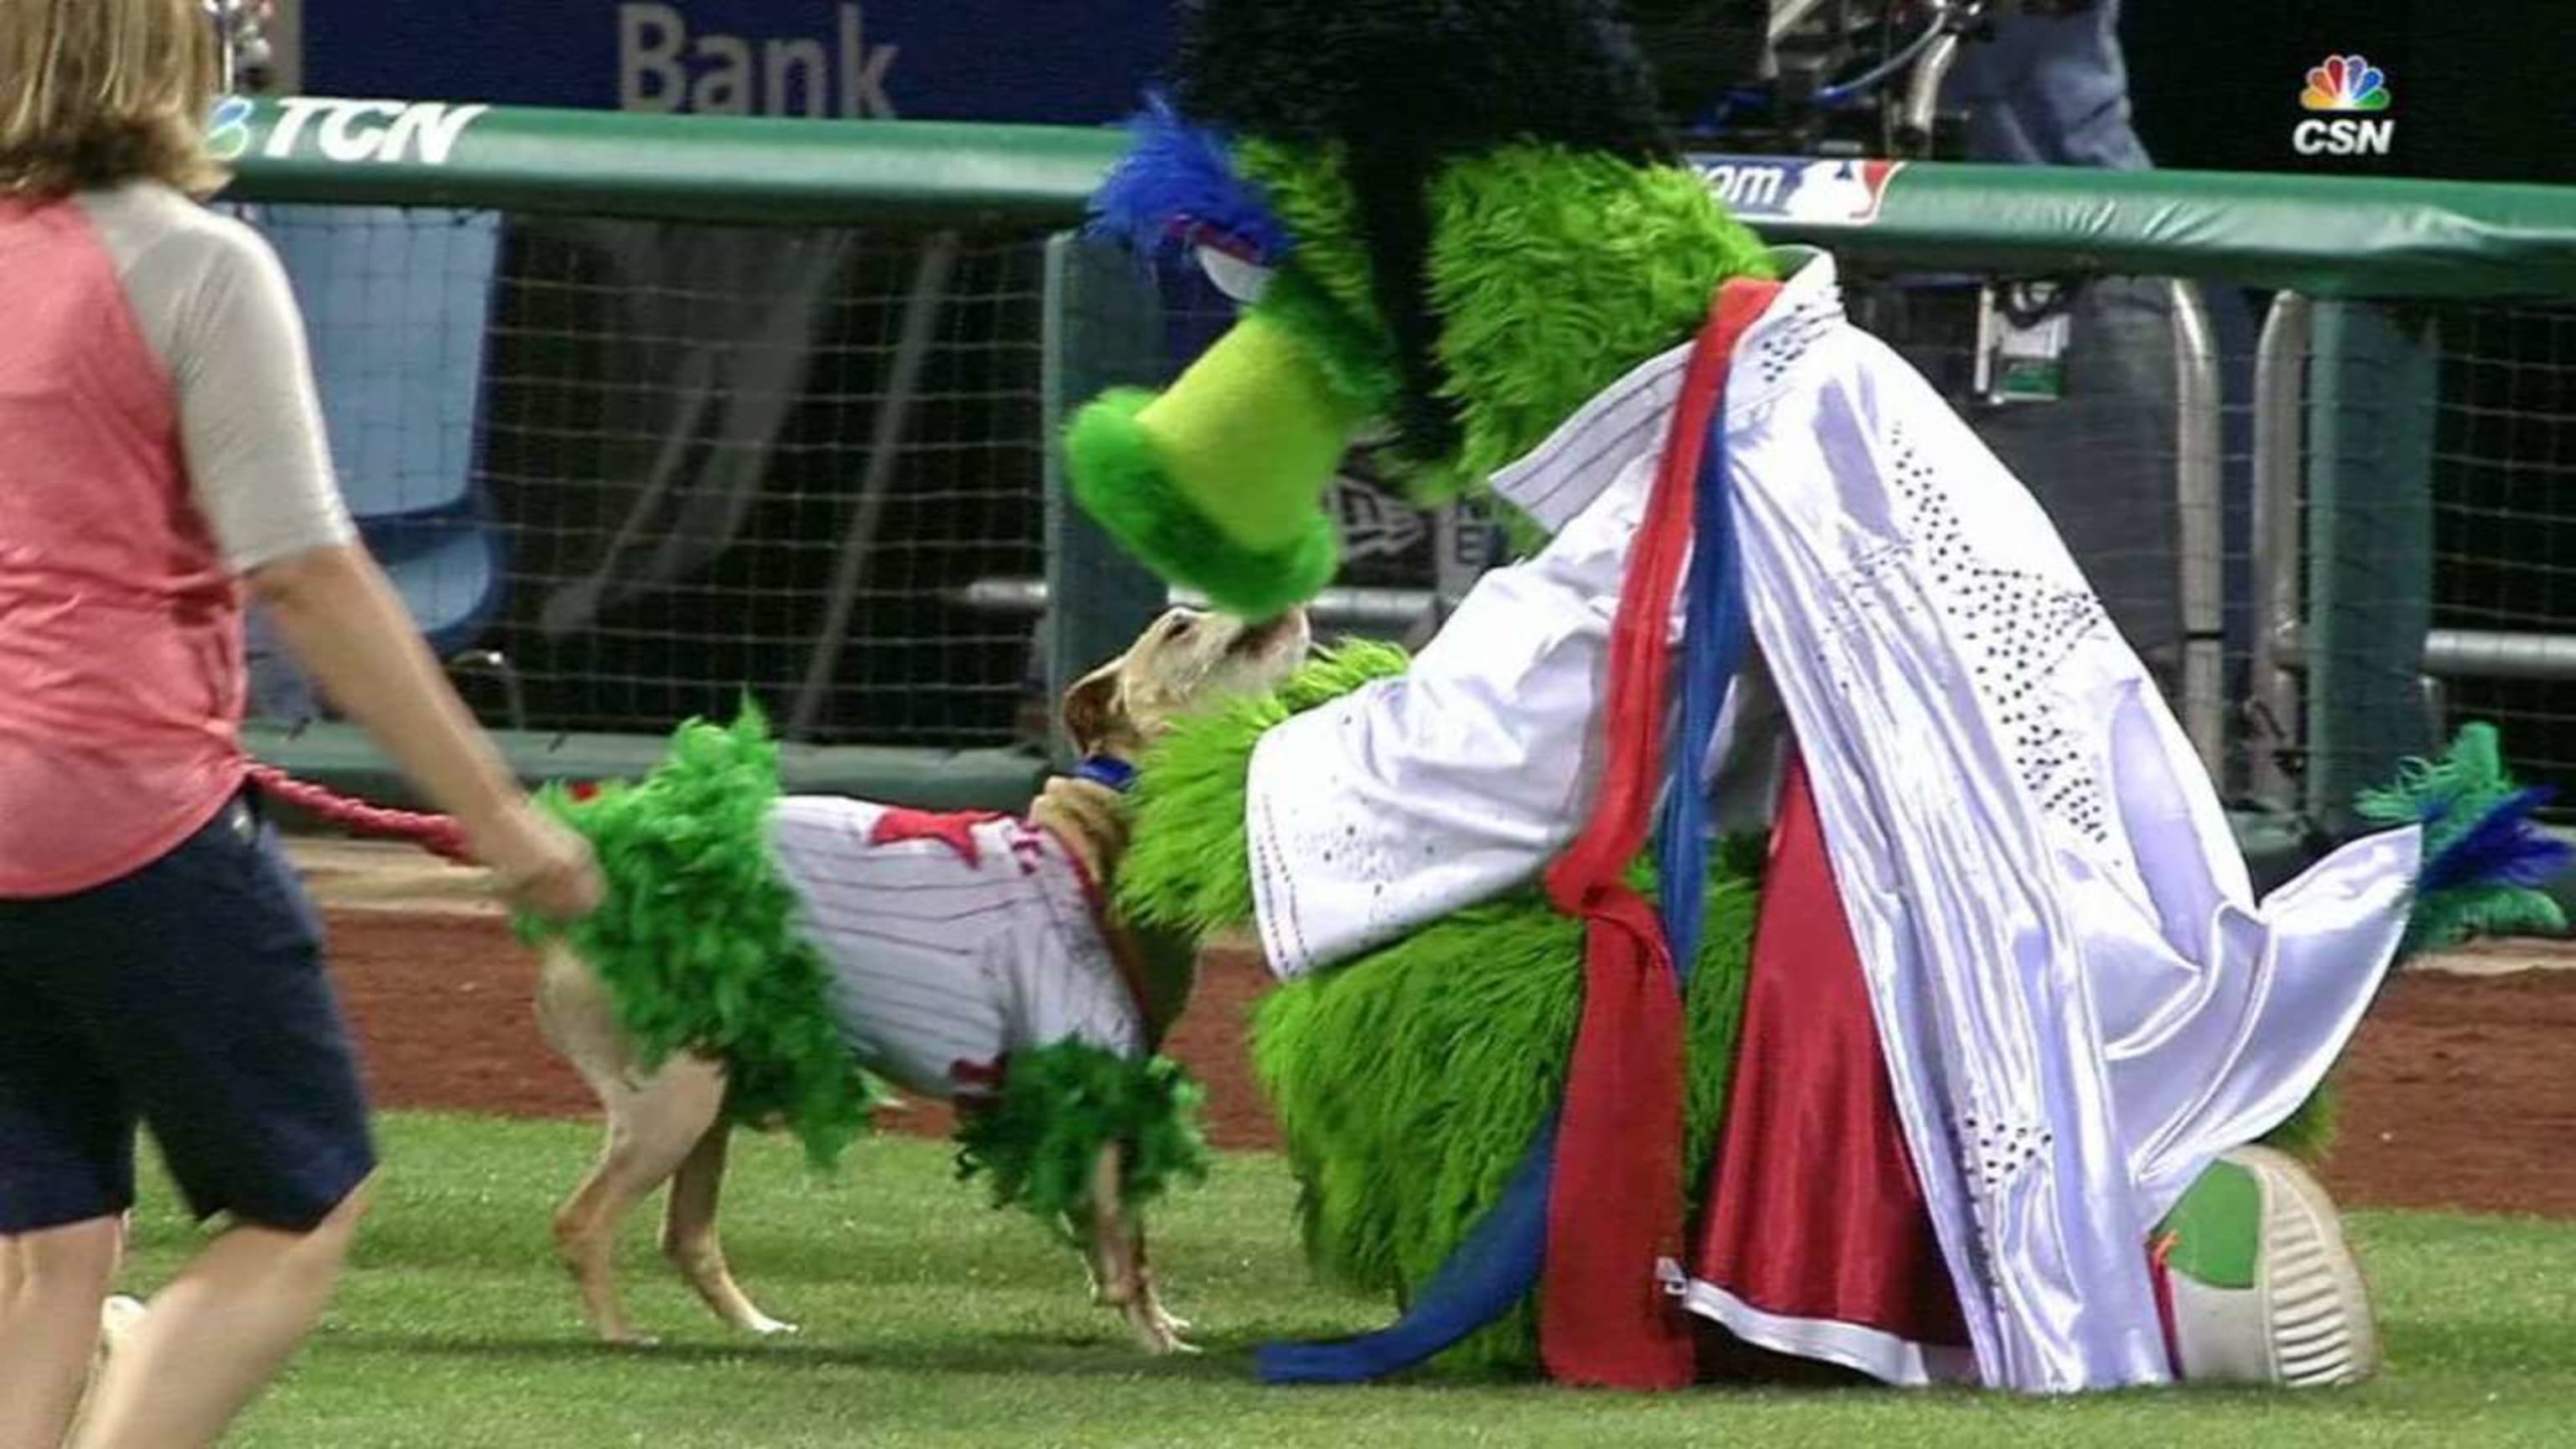 Adorable dog dressed as the Phillie Phanatic makes Phillie Phanatic do  adorable things